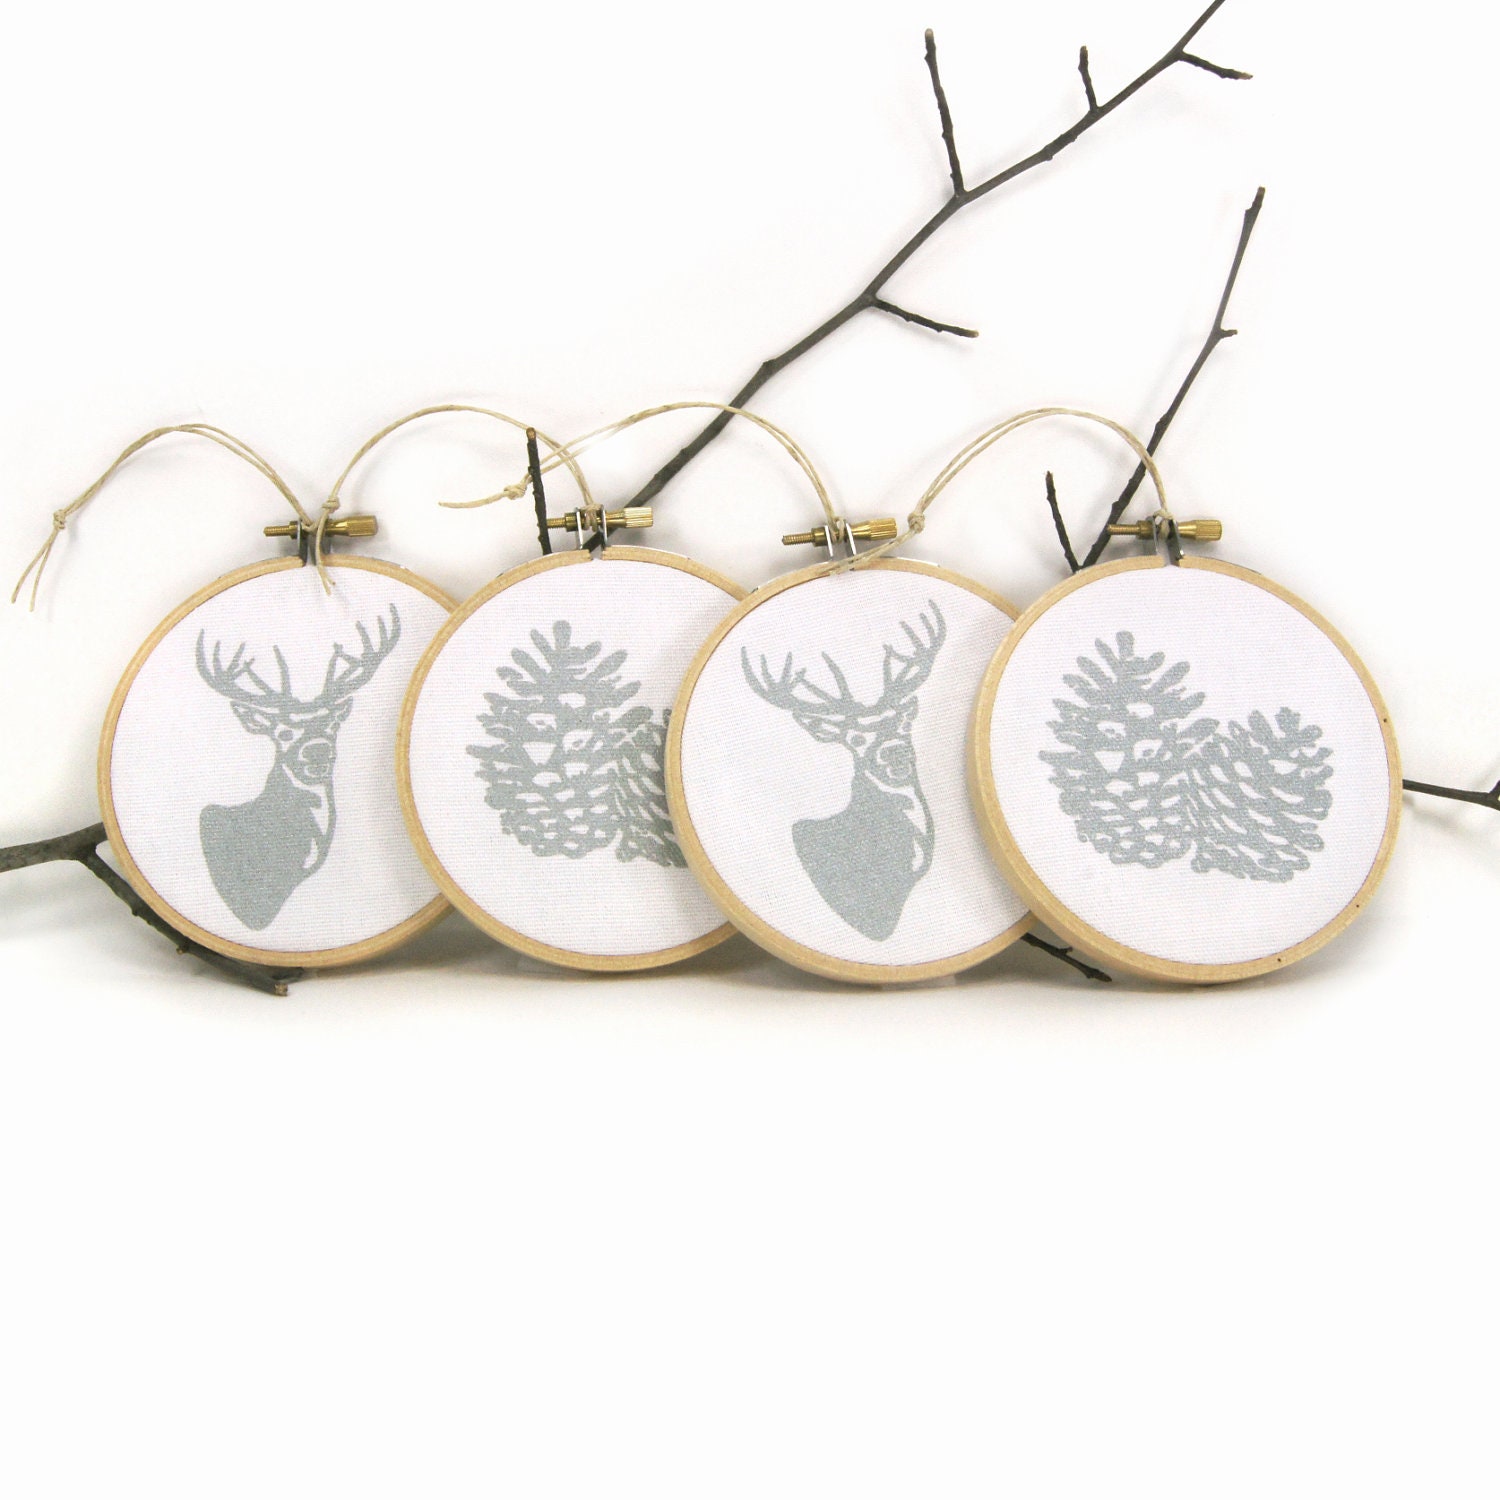 Silver and white Christmas Ornaments with deer and pinecone - Holiday home decor, Christmas decorations, Embroidery hoop ornaments set of 4 - ClassicByNature